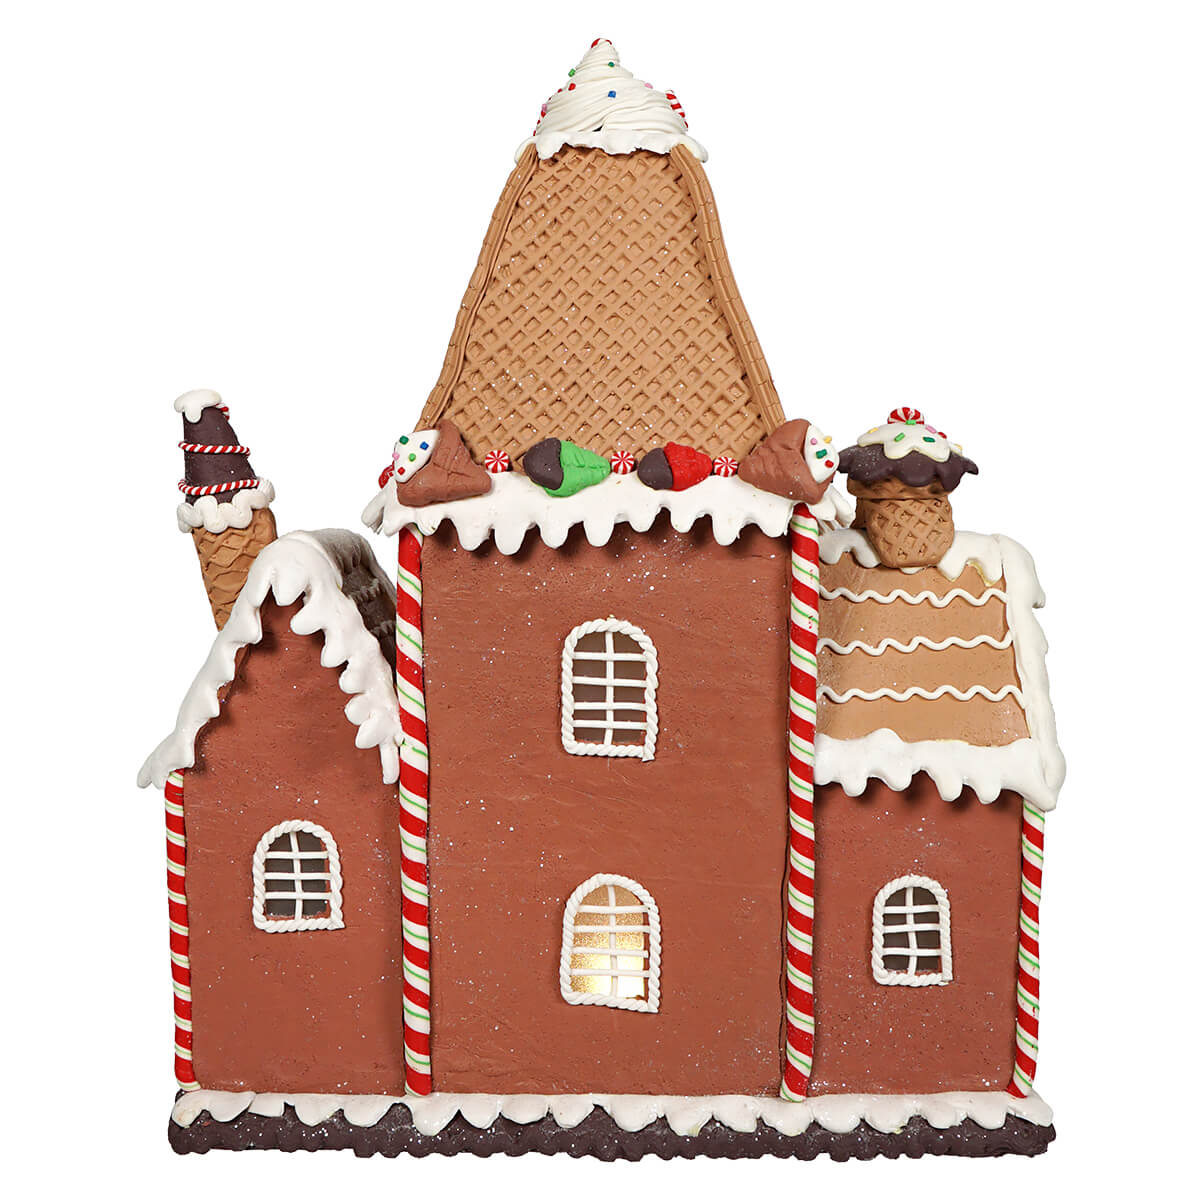 Claydough Gingerbread Lighted Fancy House